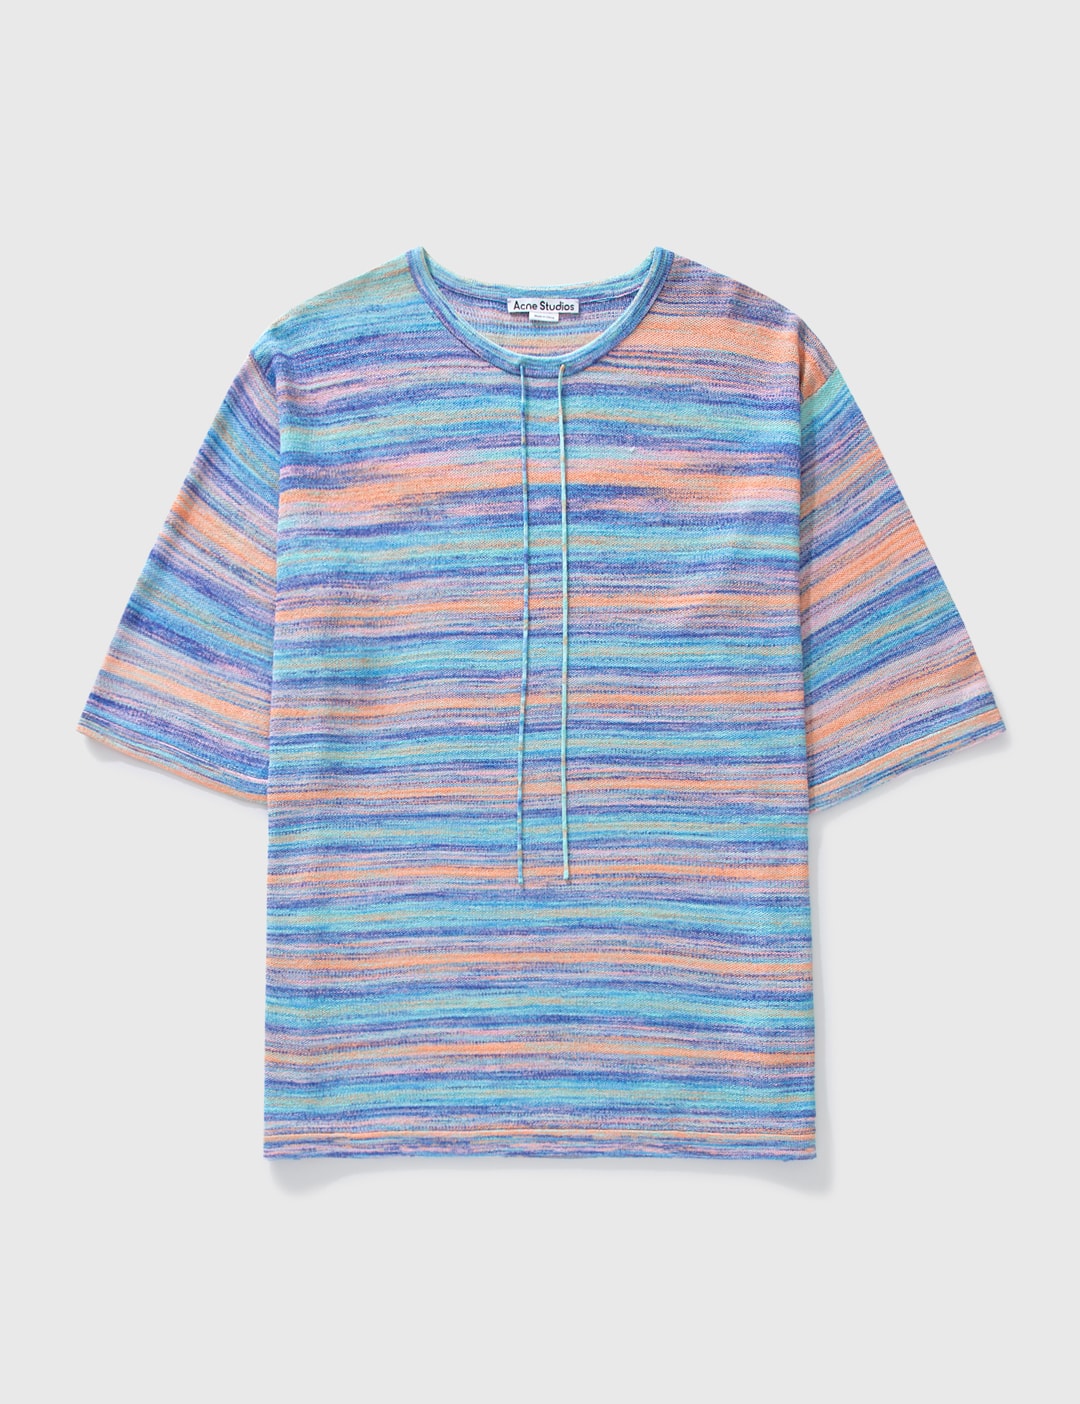 Acne Studios - Striped T-shirt HBX - Globally Curated Fashion and Lifestyle by